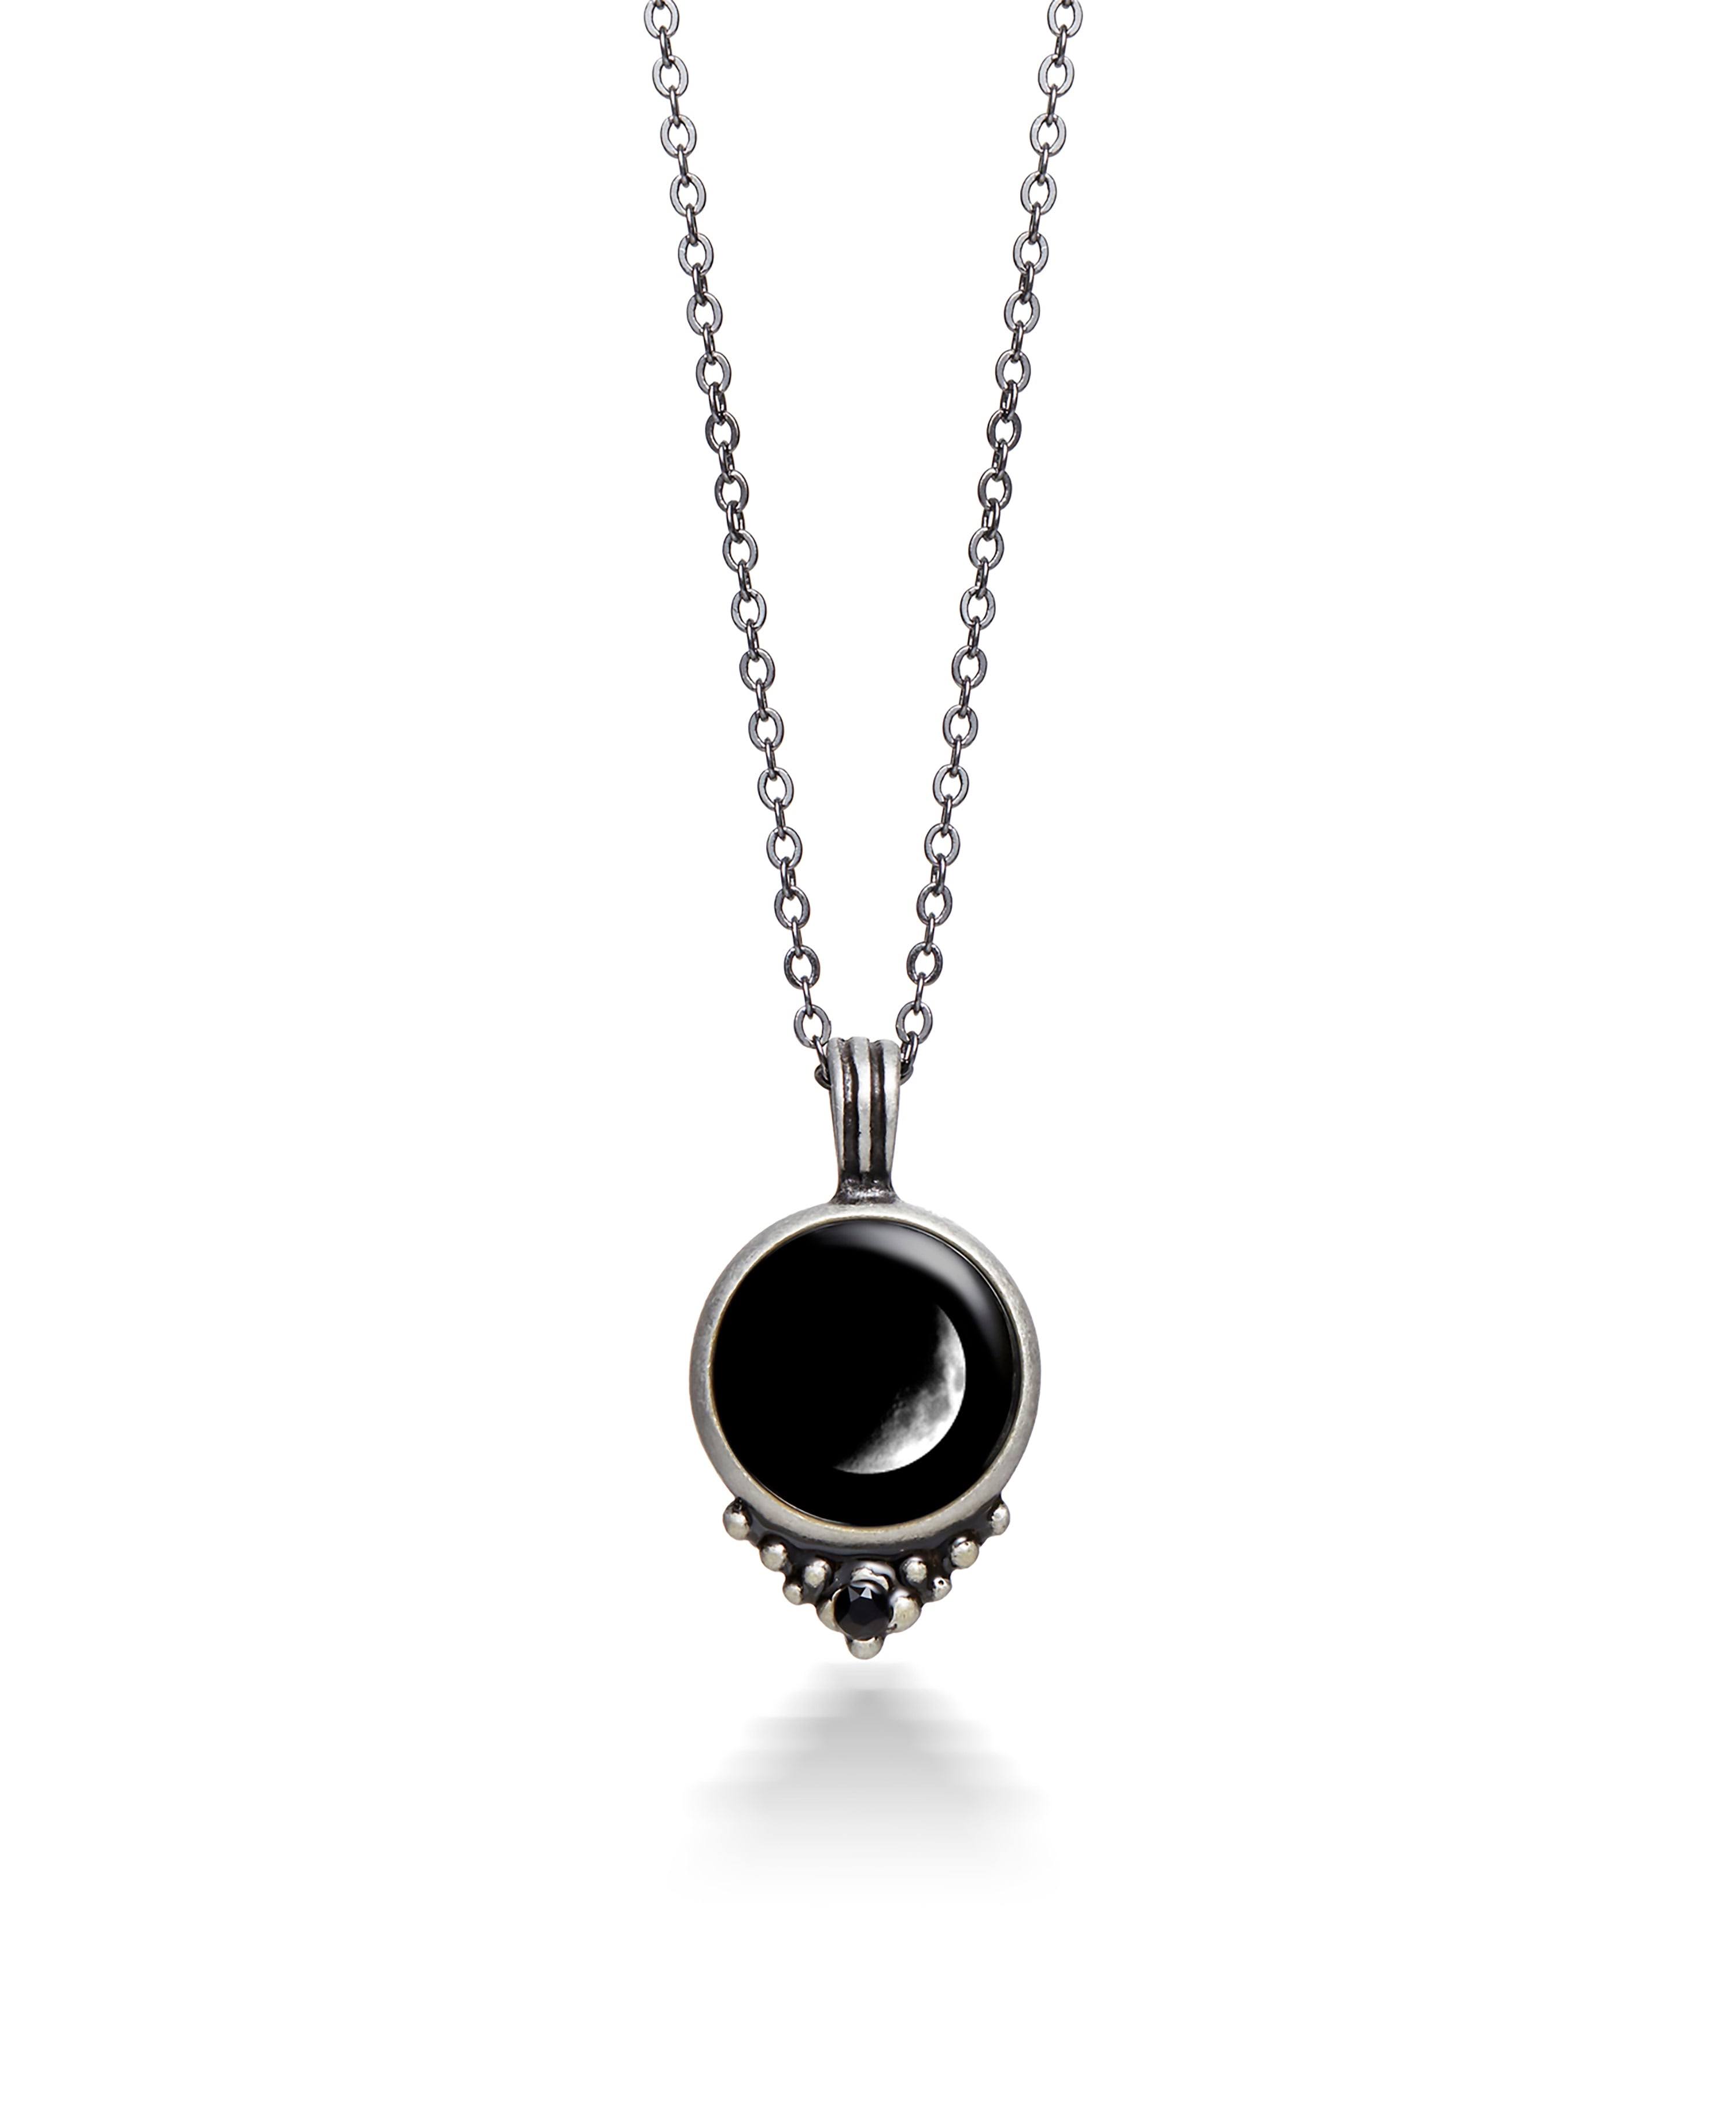 Moonglow Classic Pewter Necklace 1A